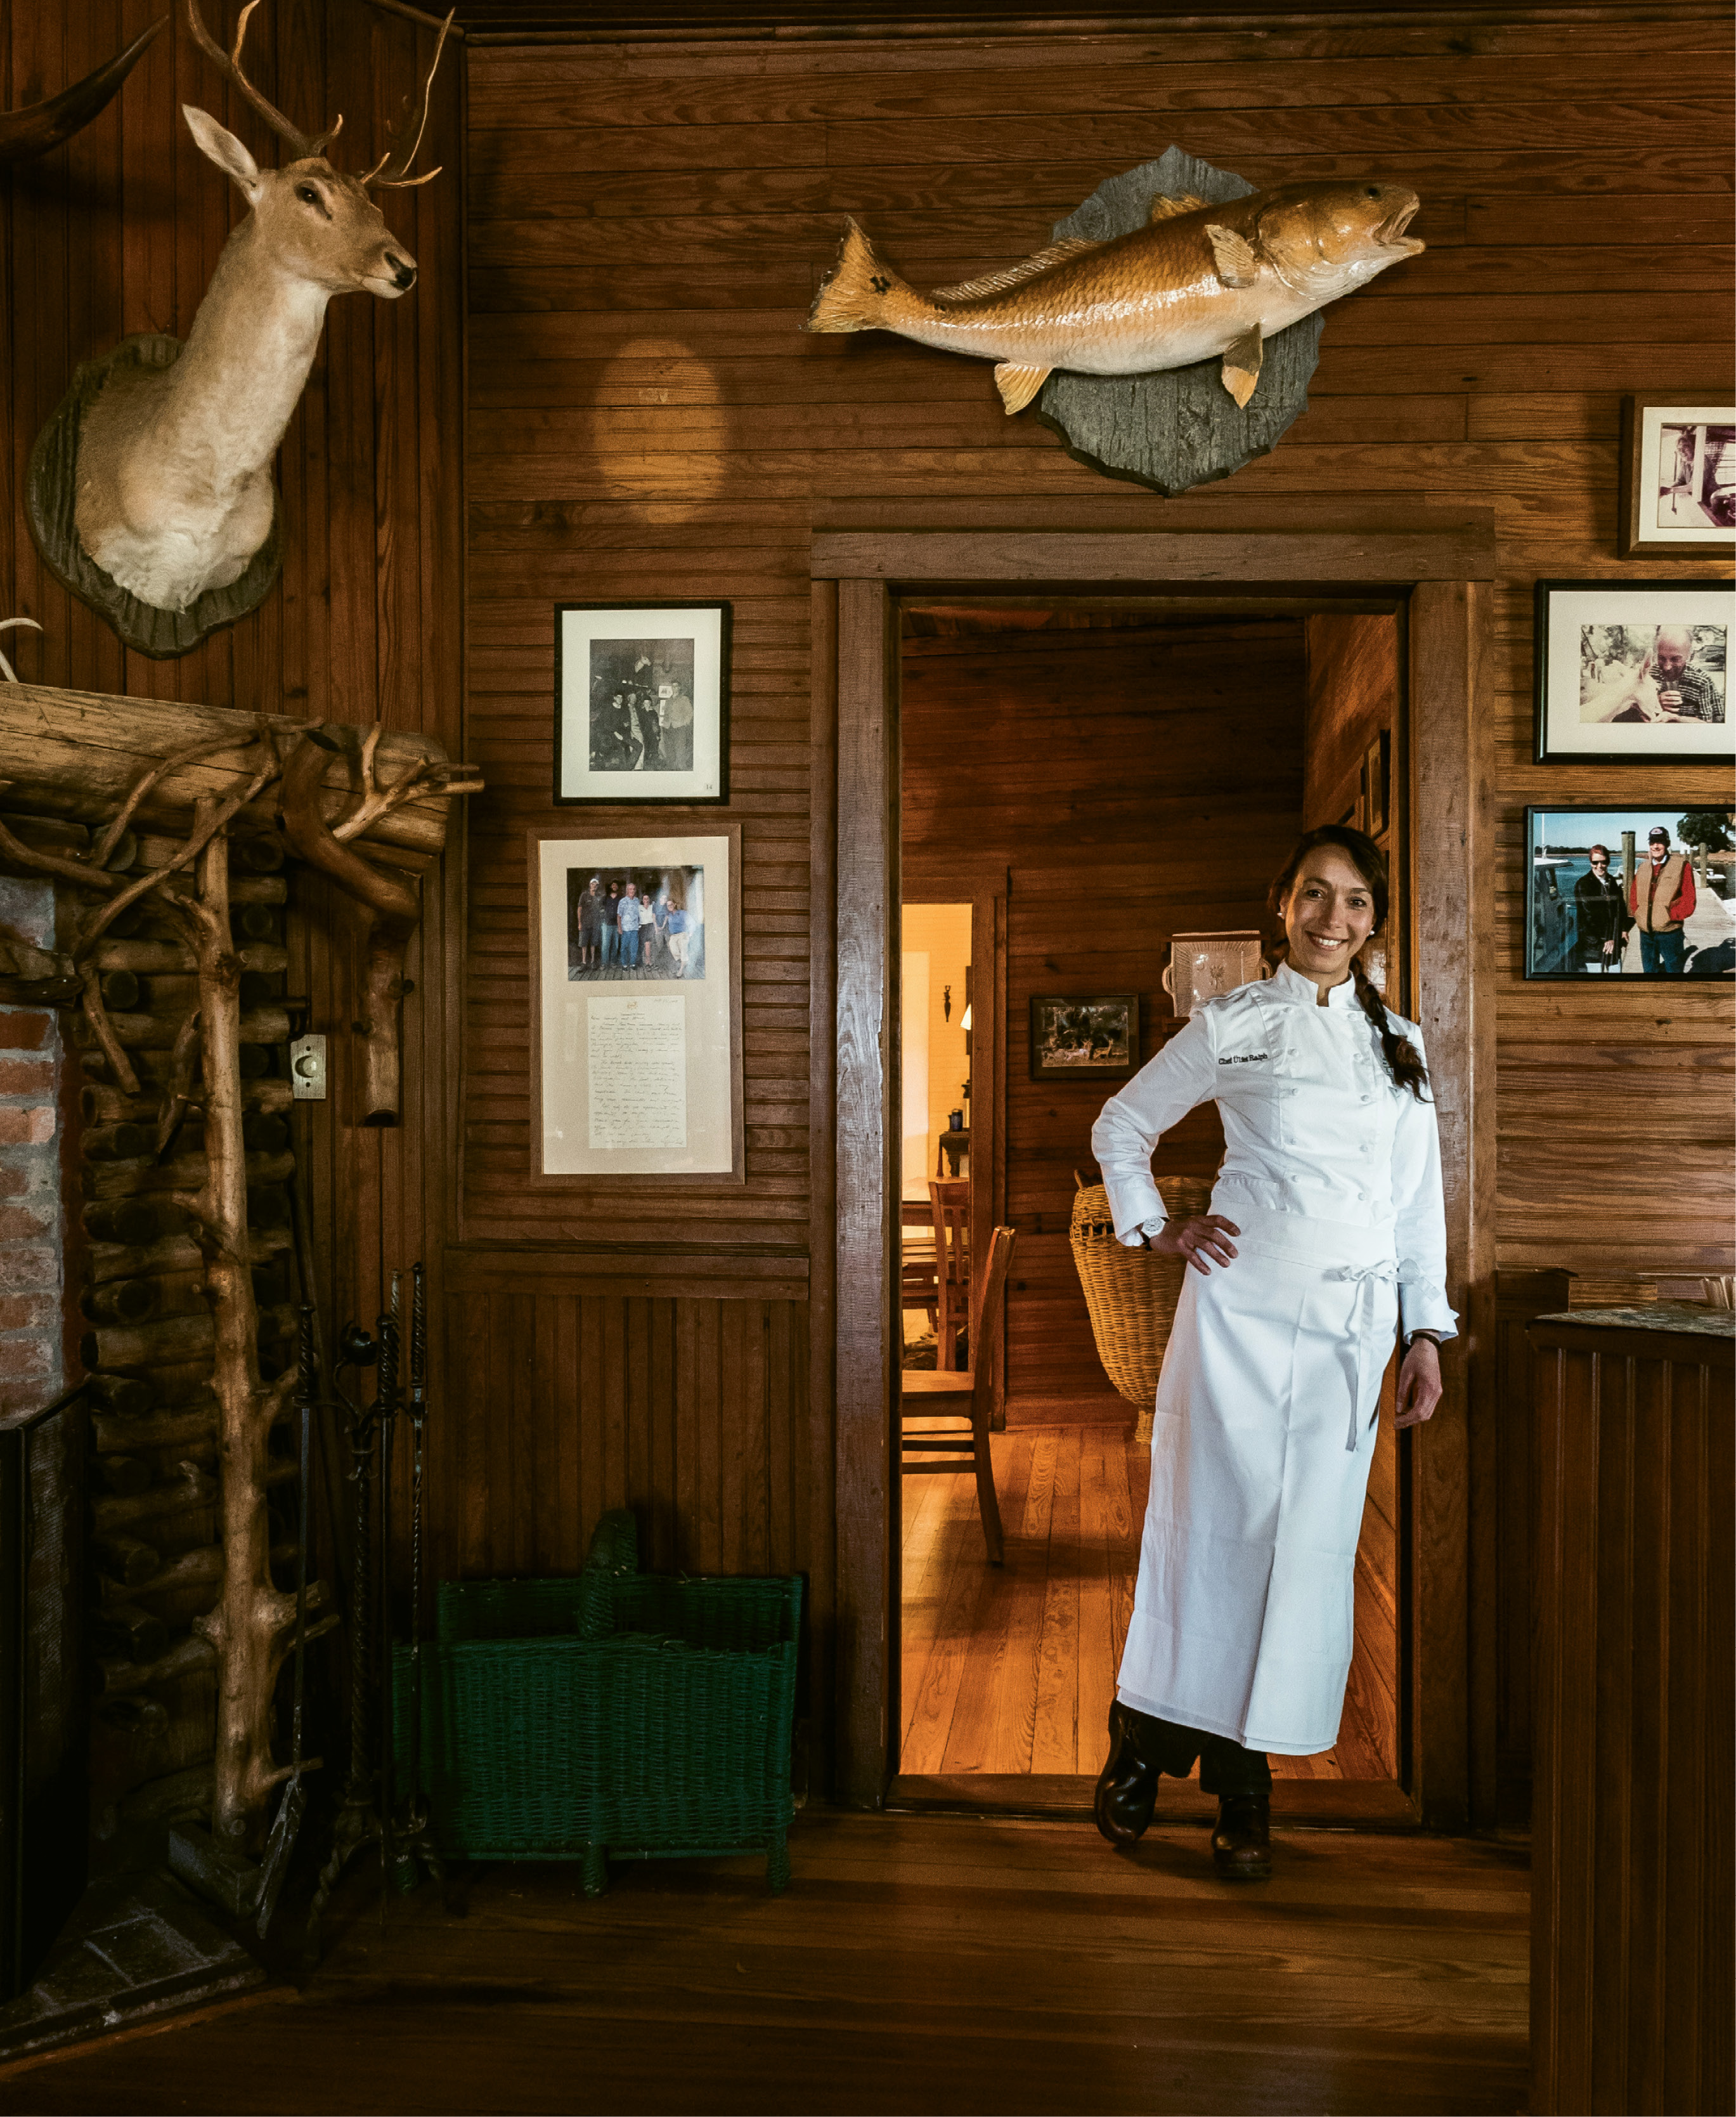 Lodge FLAvor: A native of Turkey who trained in Atlanta, Charleston, and New York, chef Ülfet Özyabasligil Ralph brings elements of Mediterranean cooking to the table.